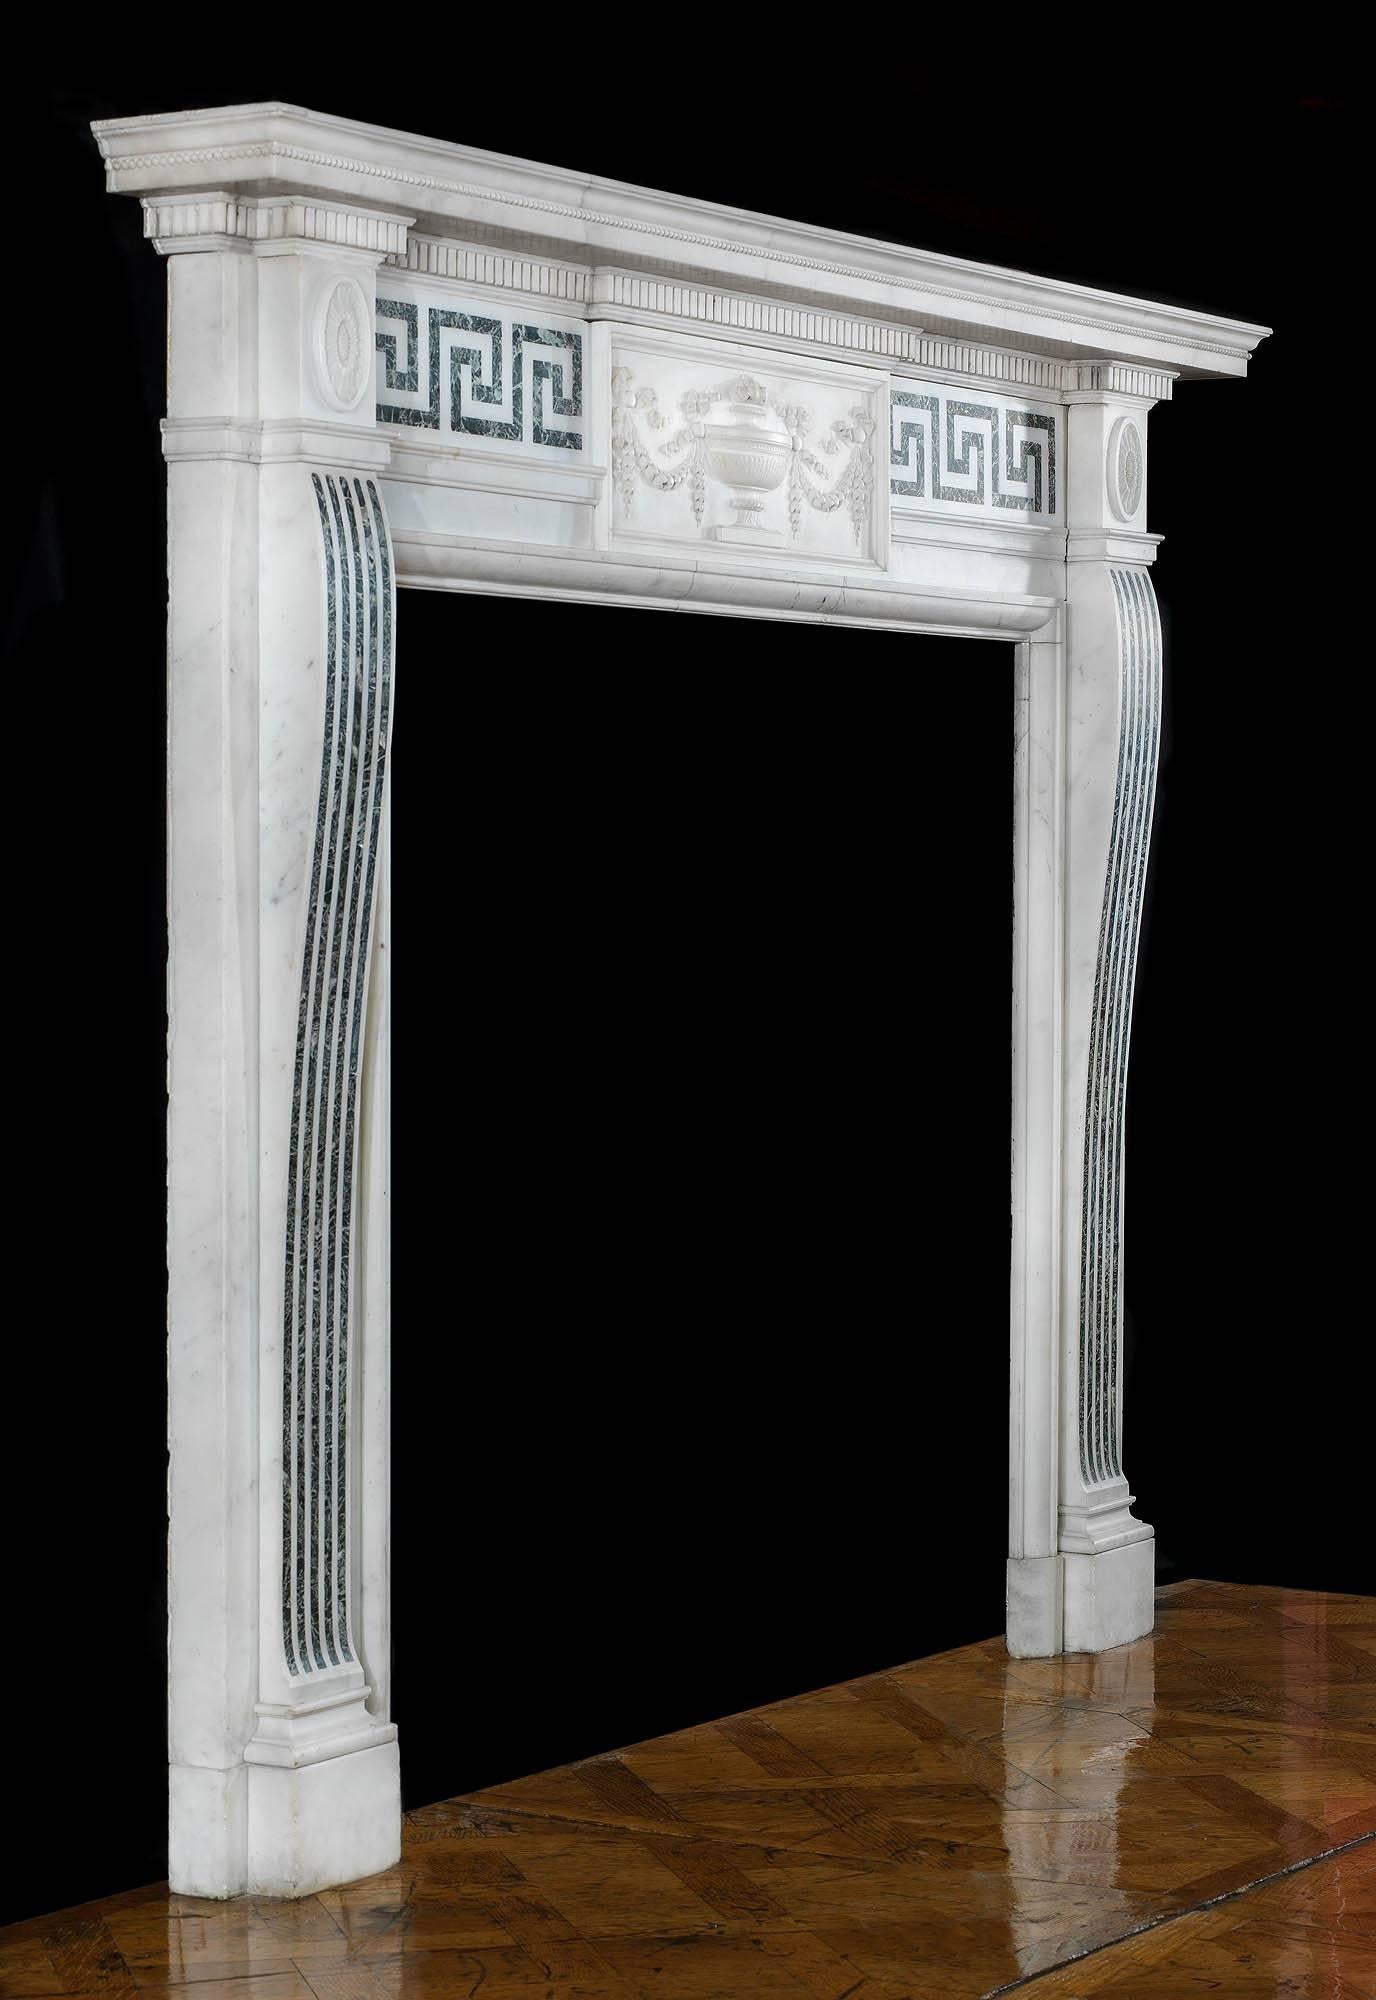 A refined and elegant Edwardian neoclassical style antique fireplace, in white statuary marble inlaid with Verdi Antico. The central plaque is decorated with a finely carved urn surrounded by bell flower swags tied with ribbons. The inlaid Verdi